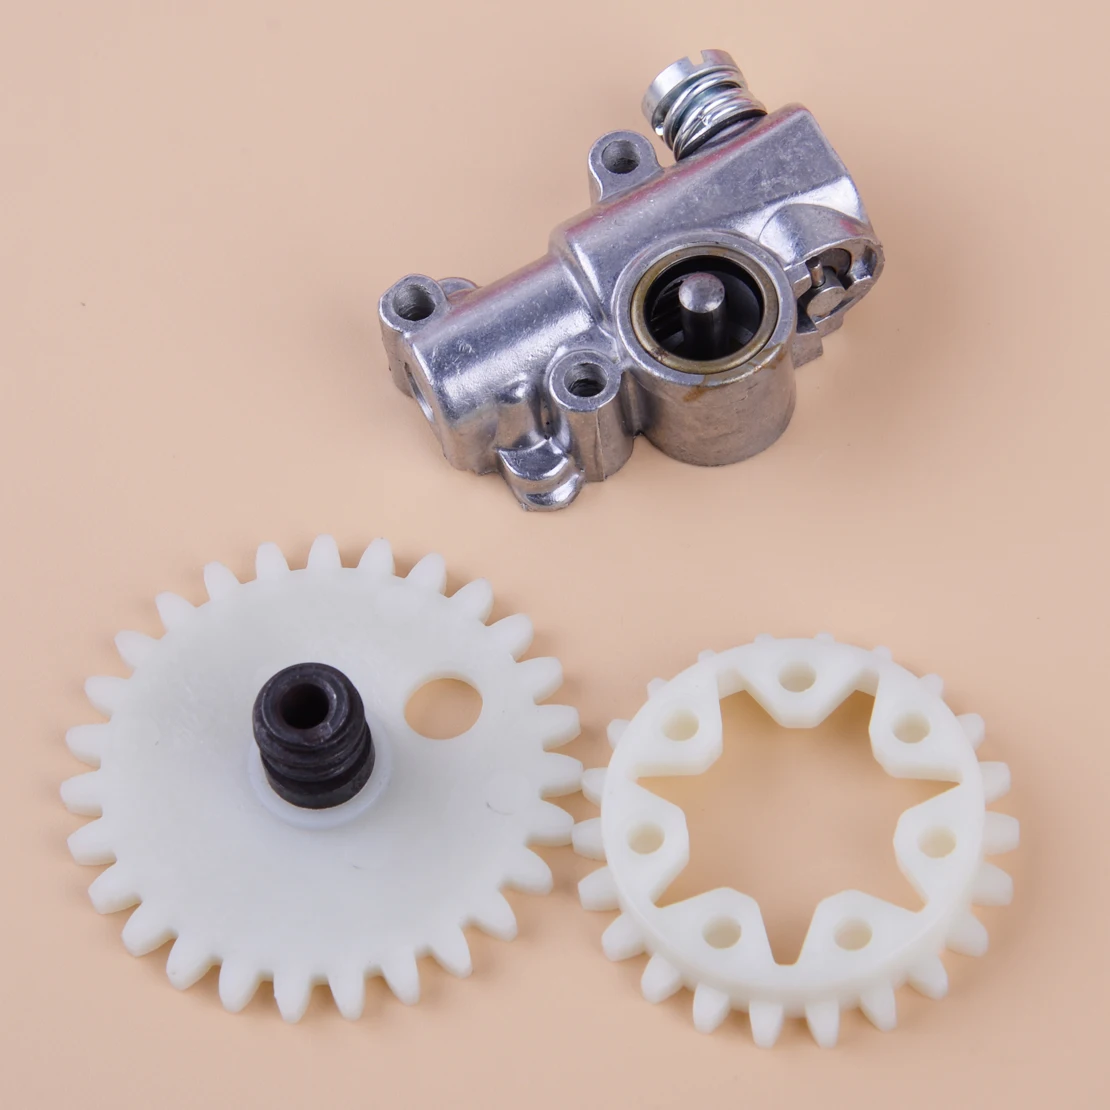 

LETAOSK Chain Oil Pump Spur Gear Wheel fit for Stihl 038 048 MS380 MS381 Chainsaw 1119 640 3200